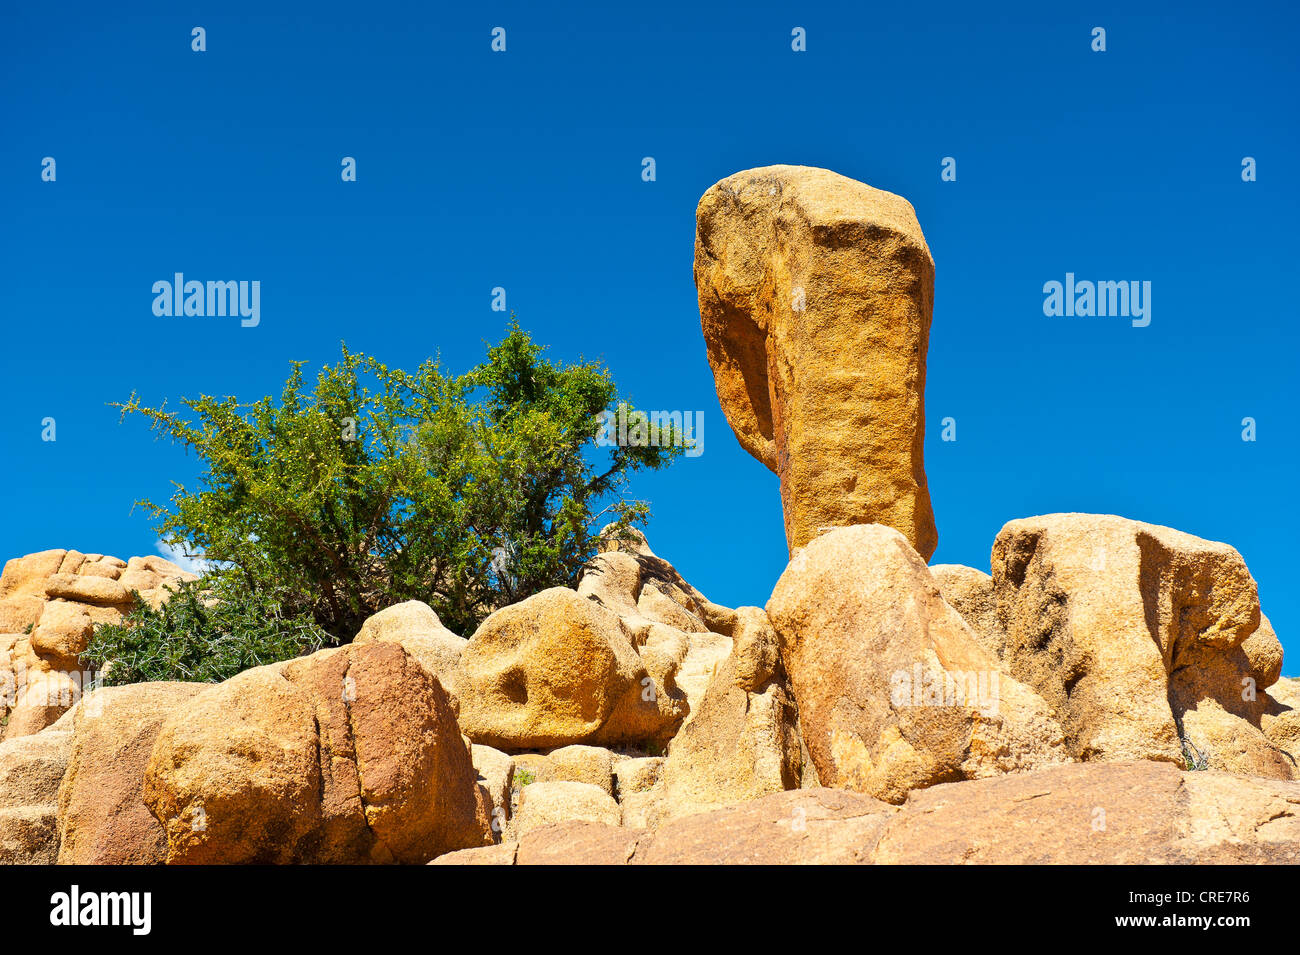 Granite boulders lying on a rocky outcrop, with young Argan (Argania spinosa) trees growing between the rocks Stock Photo